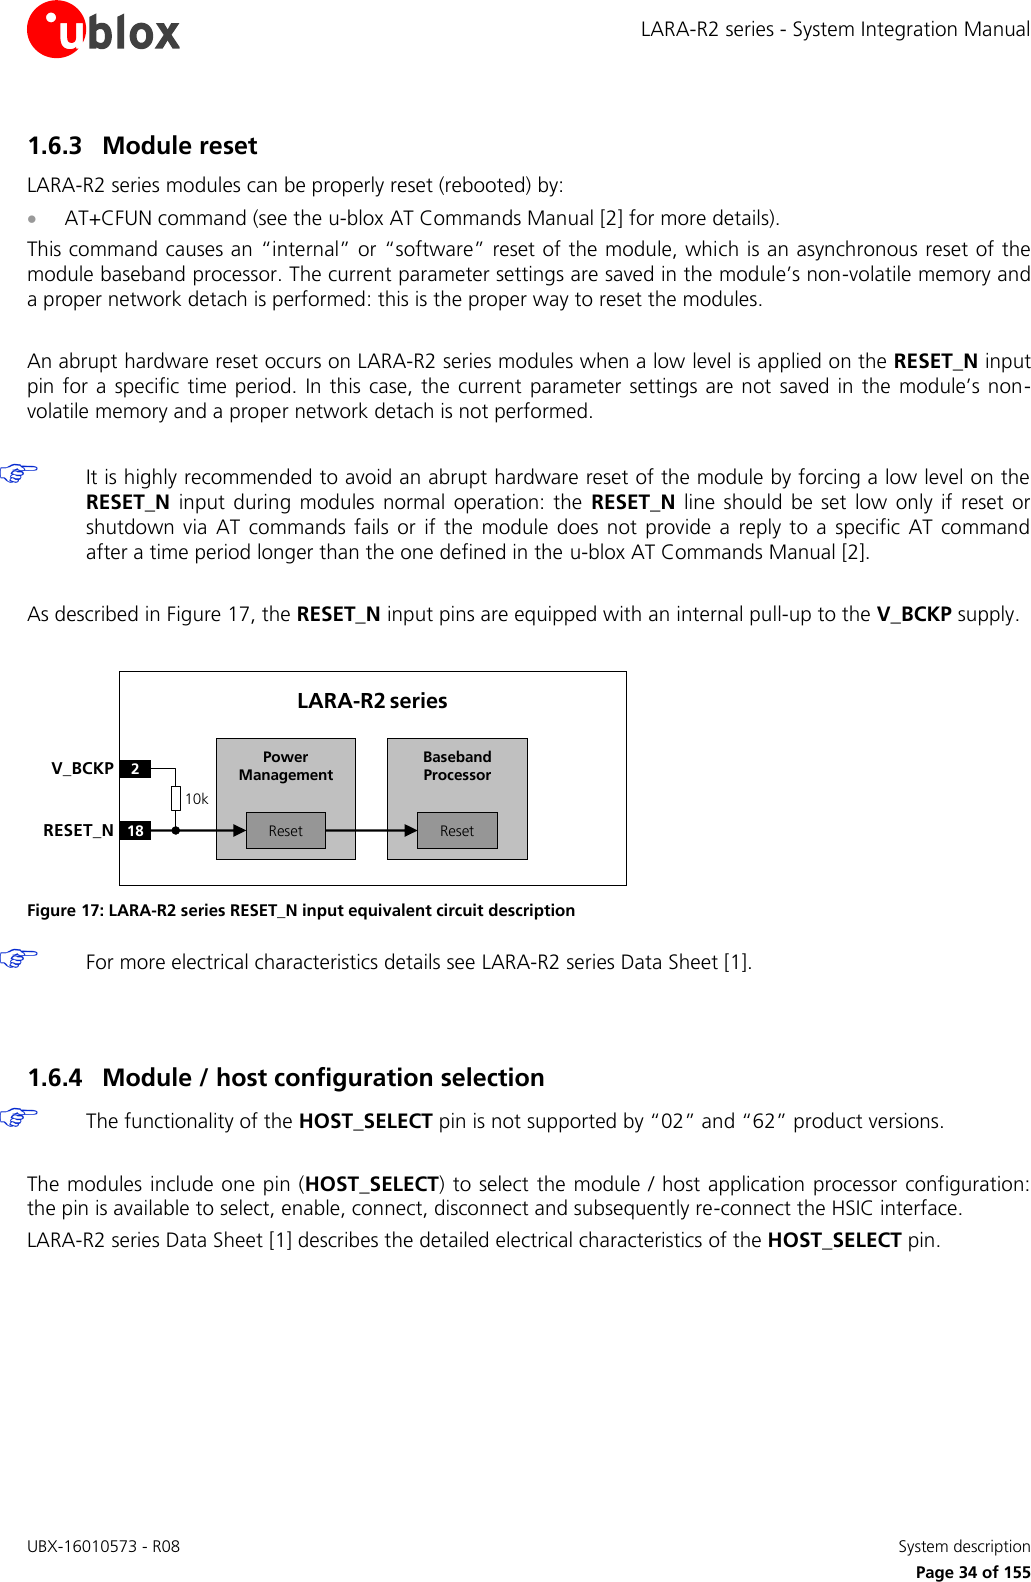 LARA-R2 series - System Integration Manual UBX-16010573 - R08    System description     Page 34 of 155 1.6.3 Module reset LARA-R2 series modules can be properly reset (rebooted) by:  AT+CFUN command (see the u-blox AT Commands Manual [2] for more details). This command causes an “internal” or “software” reset of the module, which is an asynchronous reset of the module baseband processor. The current parameter settings are saved in the module’s non-volatile memory and a proper network detach is performed: this is the proper way to reset the modules.  An abrupt hardware reset occurs on LARA-R2 series modules when a low level is applied on the RESET_N input pin for  a  specific time period.  In  this  case,  the  current  parameter settings are not  saved in  the  module’s  non-volatile memory and a proper network detach is not performed.   It is highly recommended to avoid an abrupt hardware reset of the module by forcing a low level on the RESET_N  input  during  modules  normal  operation:  the  RESET_N  line  should  be  set  low  only if  reset  or shutdown  via  AT  commands  fails  or  if  the  module  does  not provide  a  reply  to a  specific  AT  command after a time period longer than the one defined in the u-blox AT Commands Manual [2].  As described in Figure 17, the RESET_N input pins are equipped with an internal pull-up to the V_BCKP supply.  Baseband Processor18RESET_NLARA-R2 series2V_BCKPResetPower ManagementReset10k Figure 17: LARA-R2 series RESET_N input equivalent circuit description  For more electrical characteristics details see LARA-R2 series Data Sheet [1].   1.6.4 Module / host configuration selection   The functionality of the HOST_SELECT pin is not supported by “02” and “62” product versions.  The modules include one pin (HOST_SELECT) to select the module / host application processor configuration: the pin is available to select, enable, connect, disconnect and subsequently re-connect the HSIC interface. LARA-R2 series Data Sheet [1] describes the detailed electrical characteristics of the HOST_SELECT pin.   